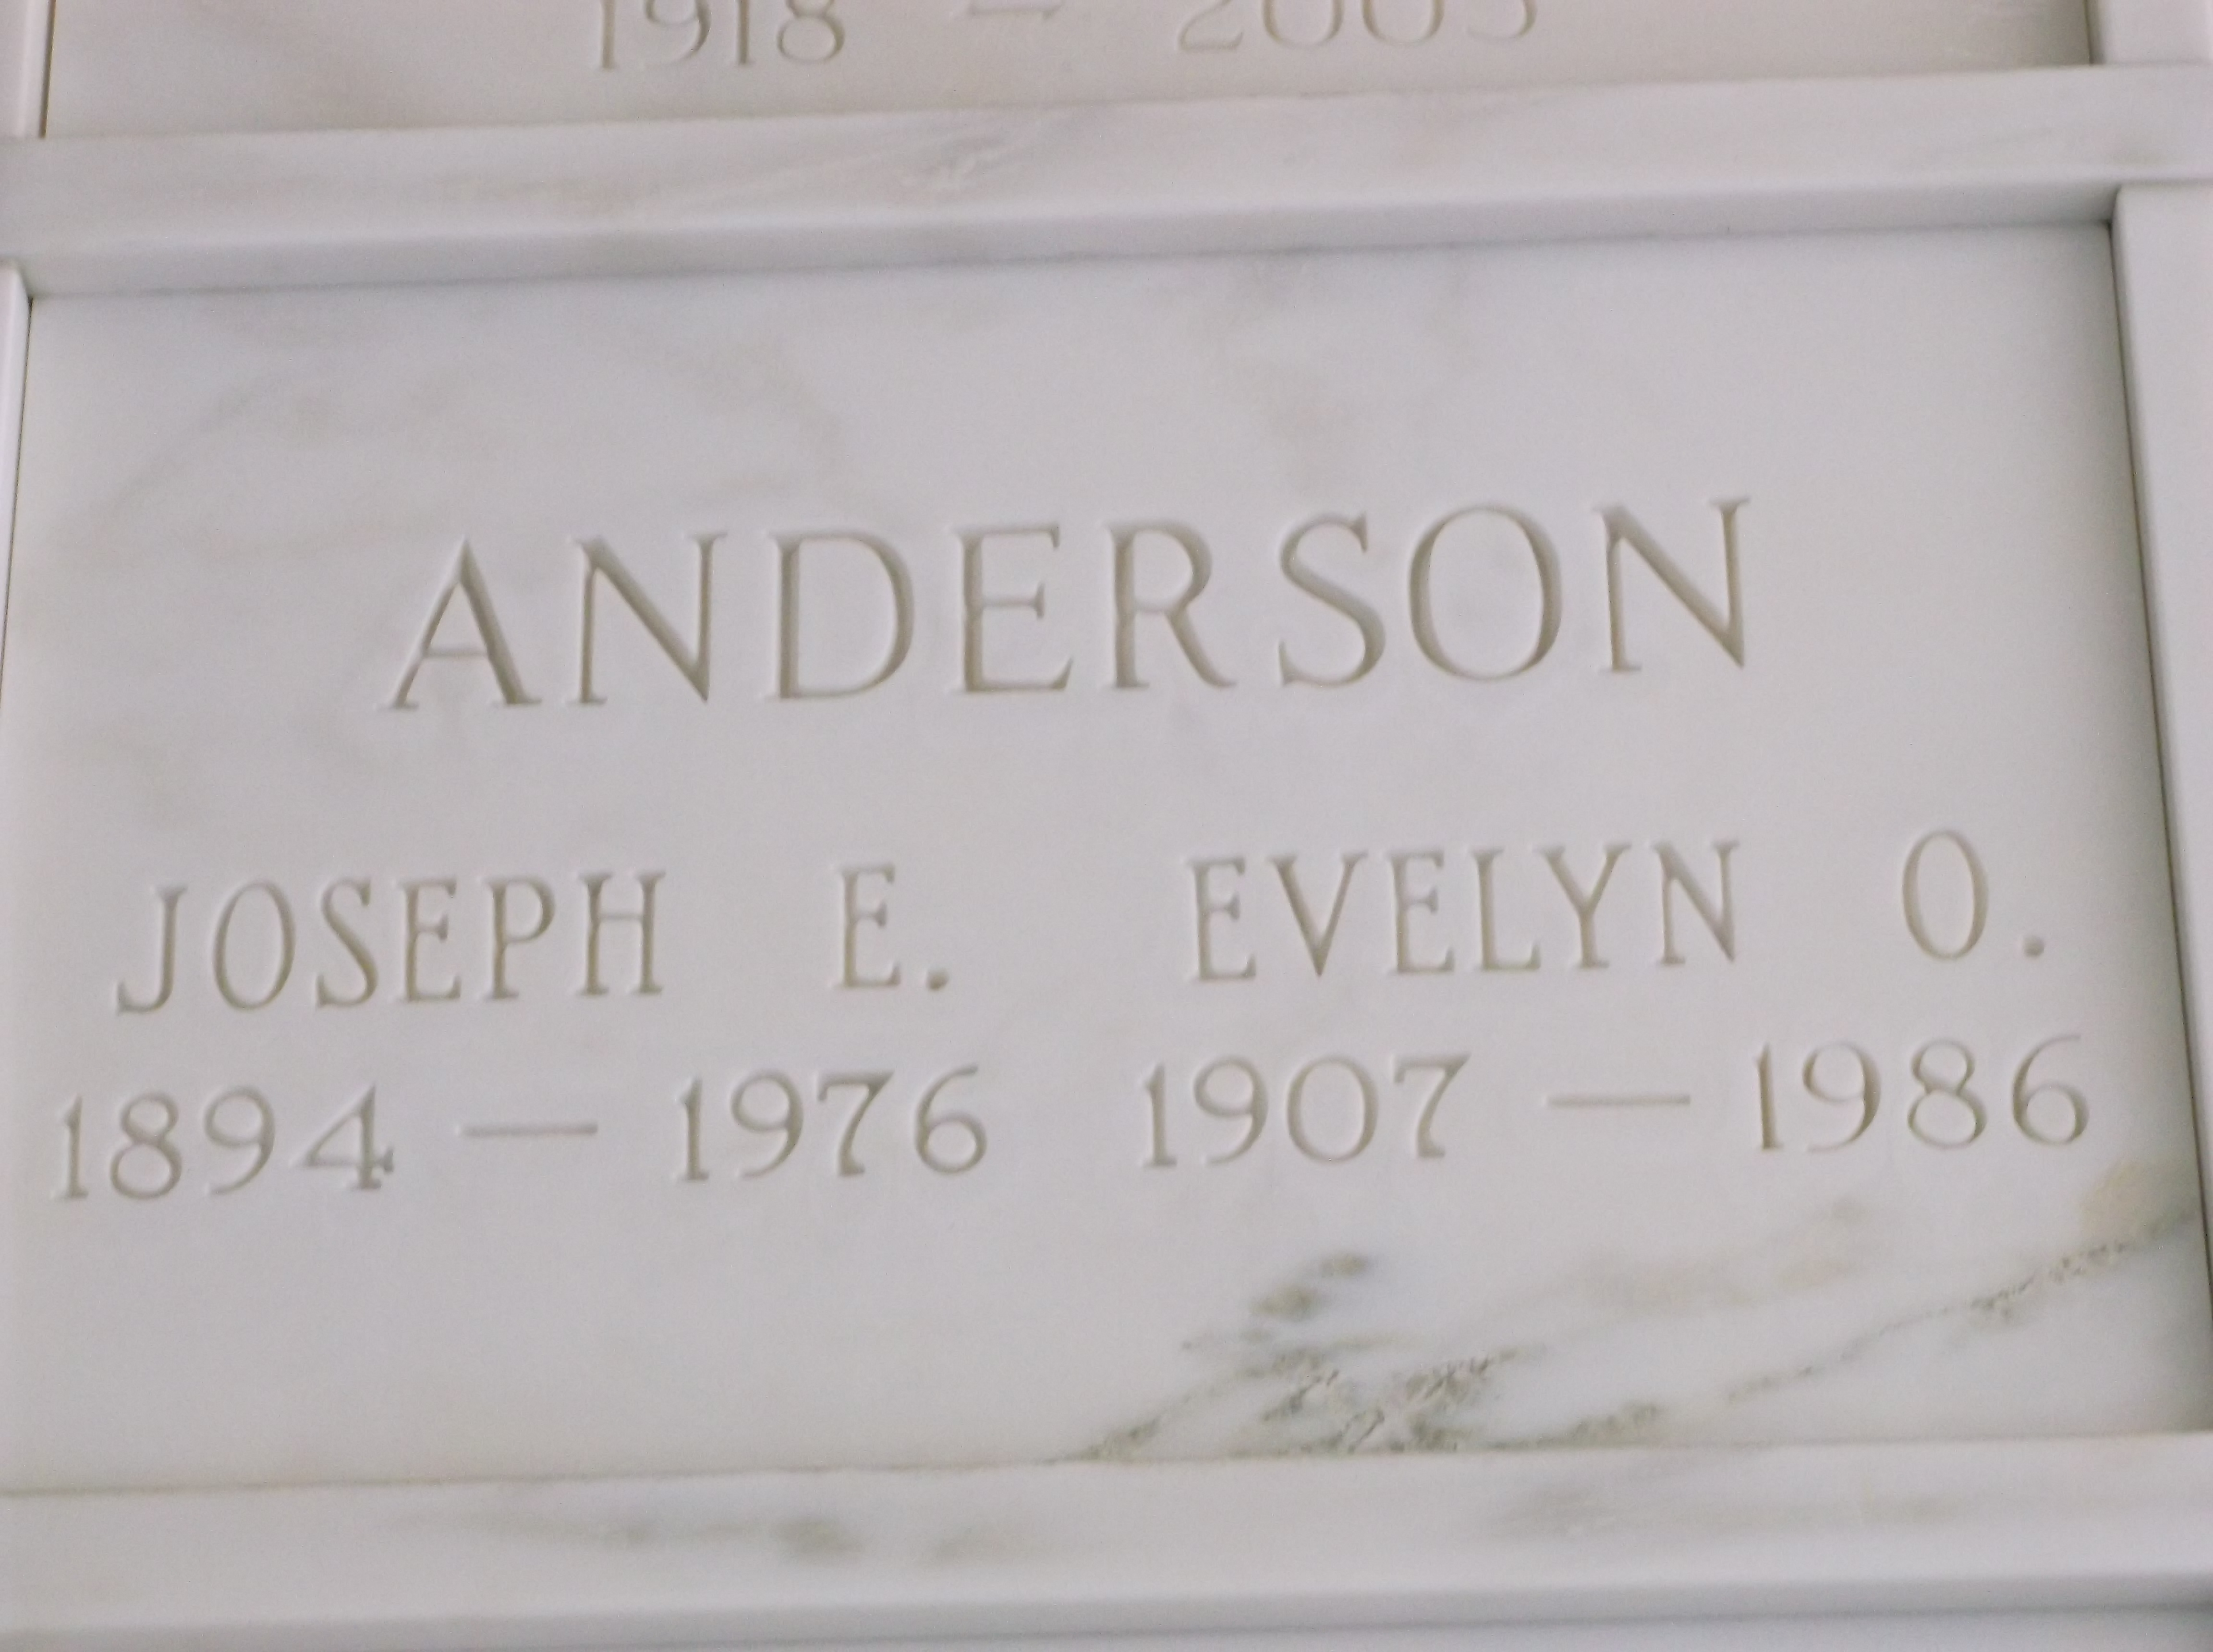 Evelyn O Anderson